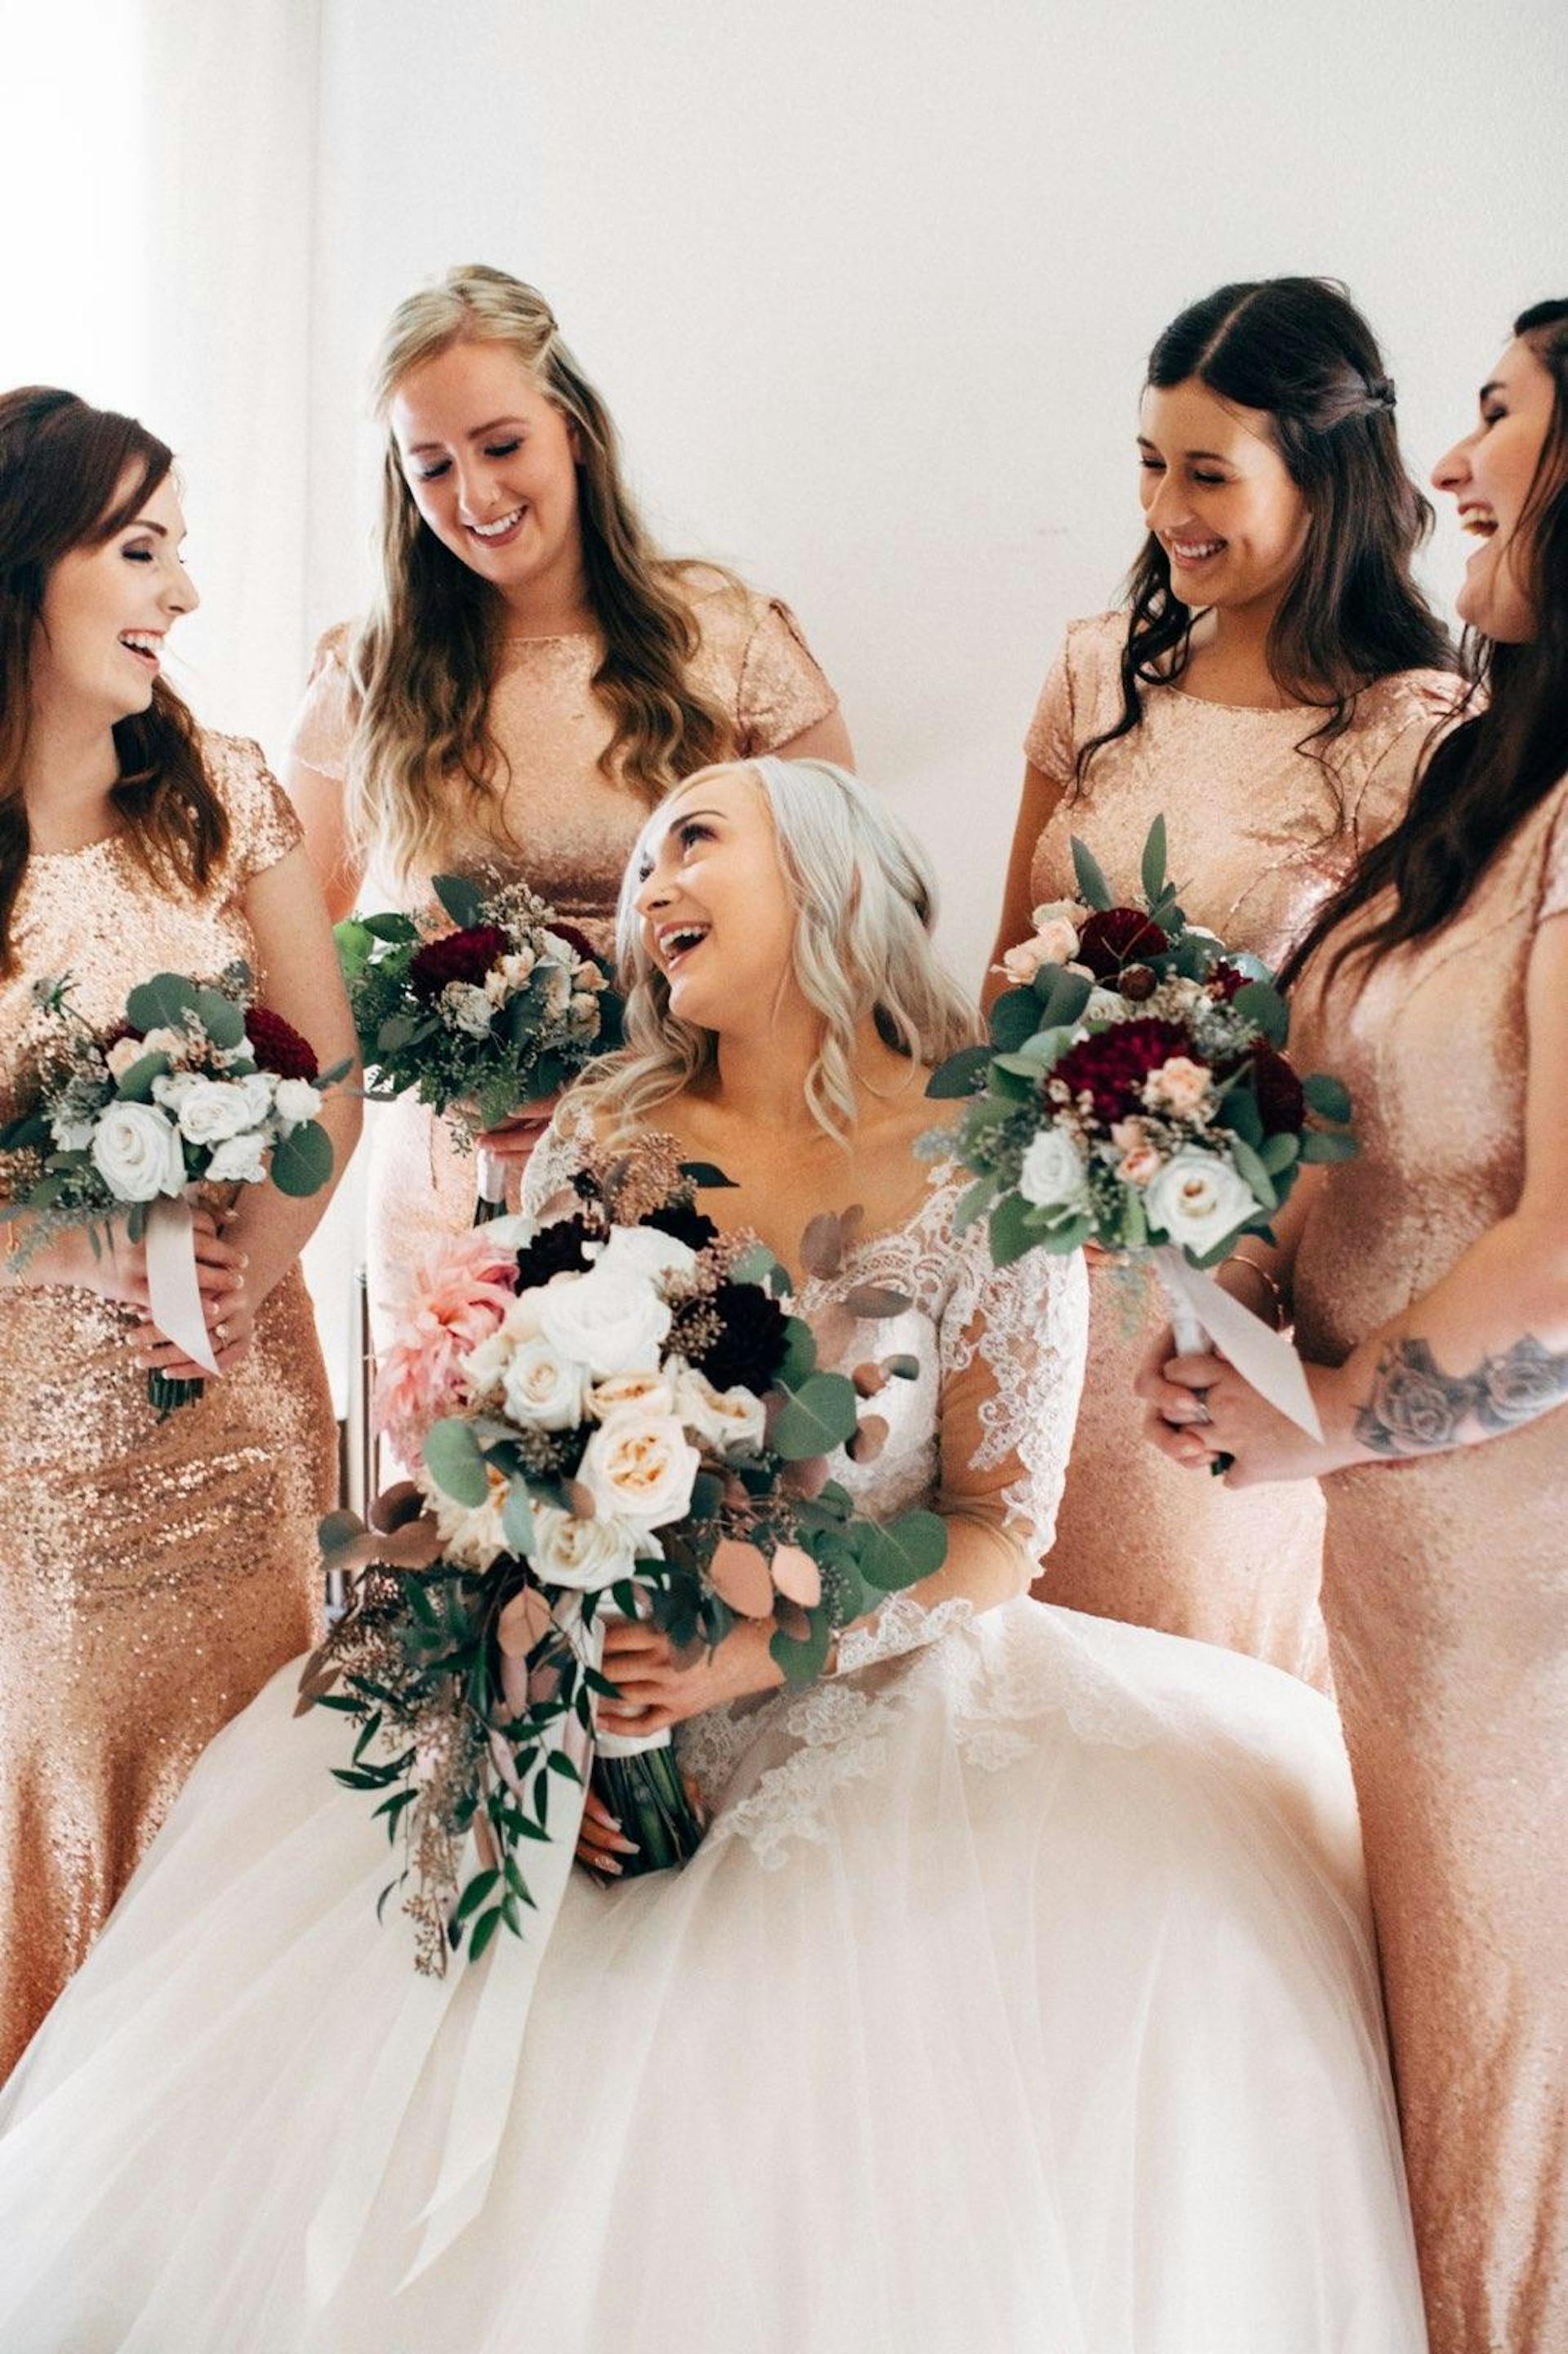 A happy bride and her bridesmaids holding bouquets | Source: Pexels